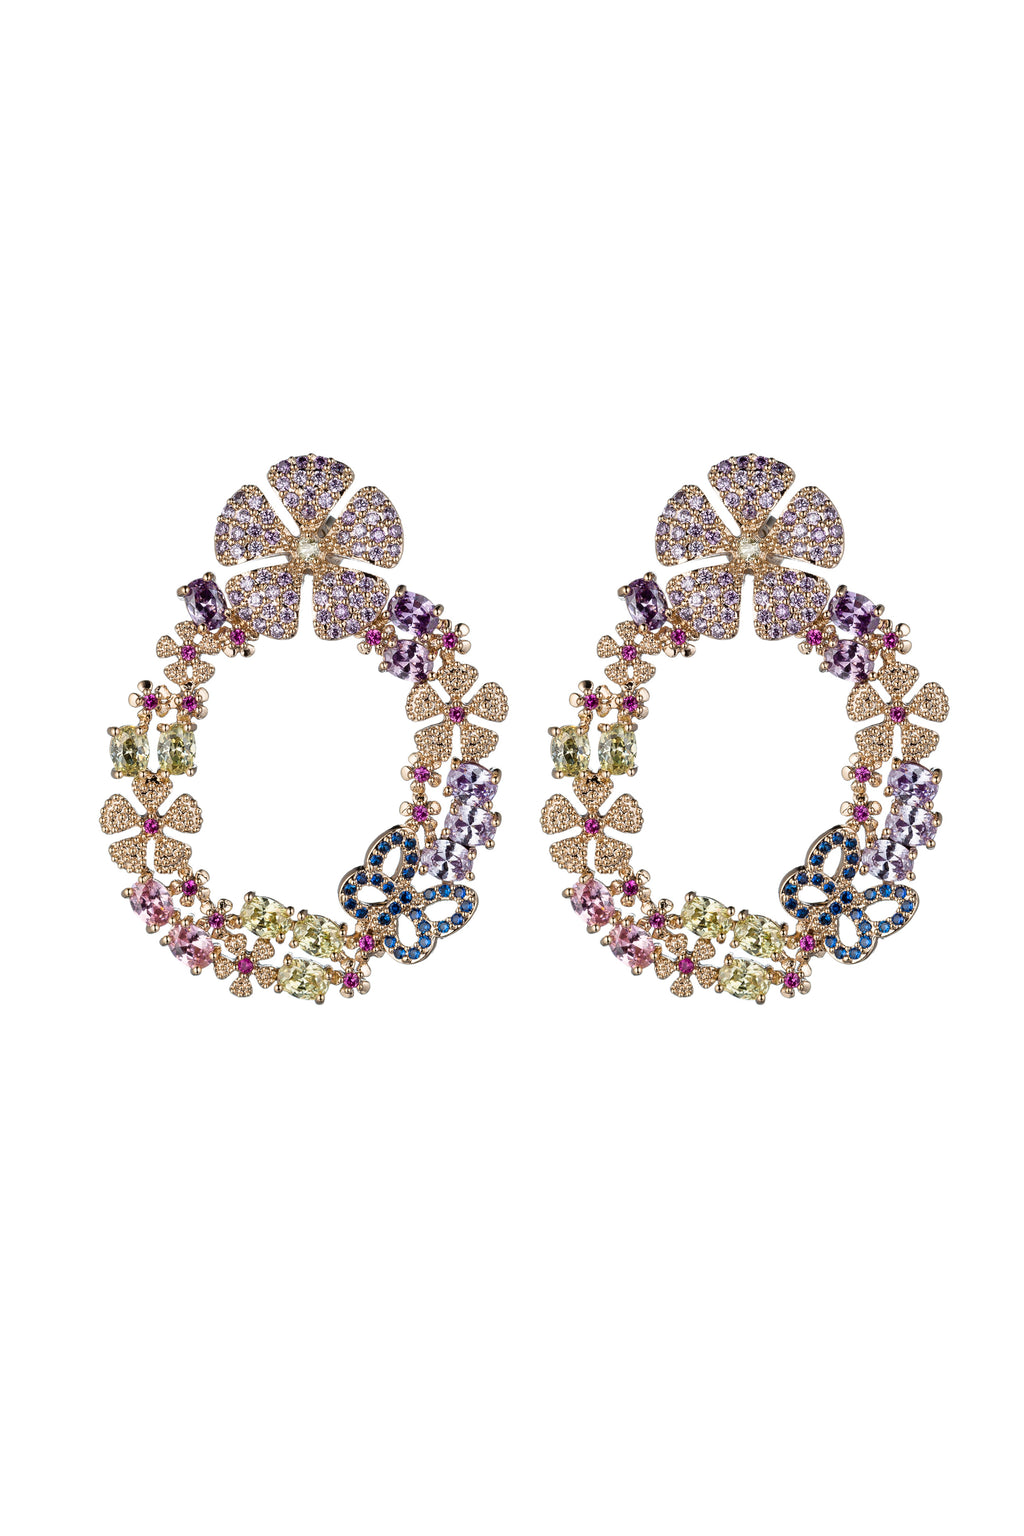 Butterfly flower statement earrings studded with CZ crystals.